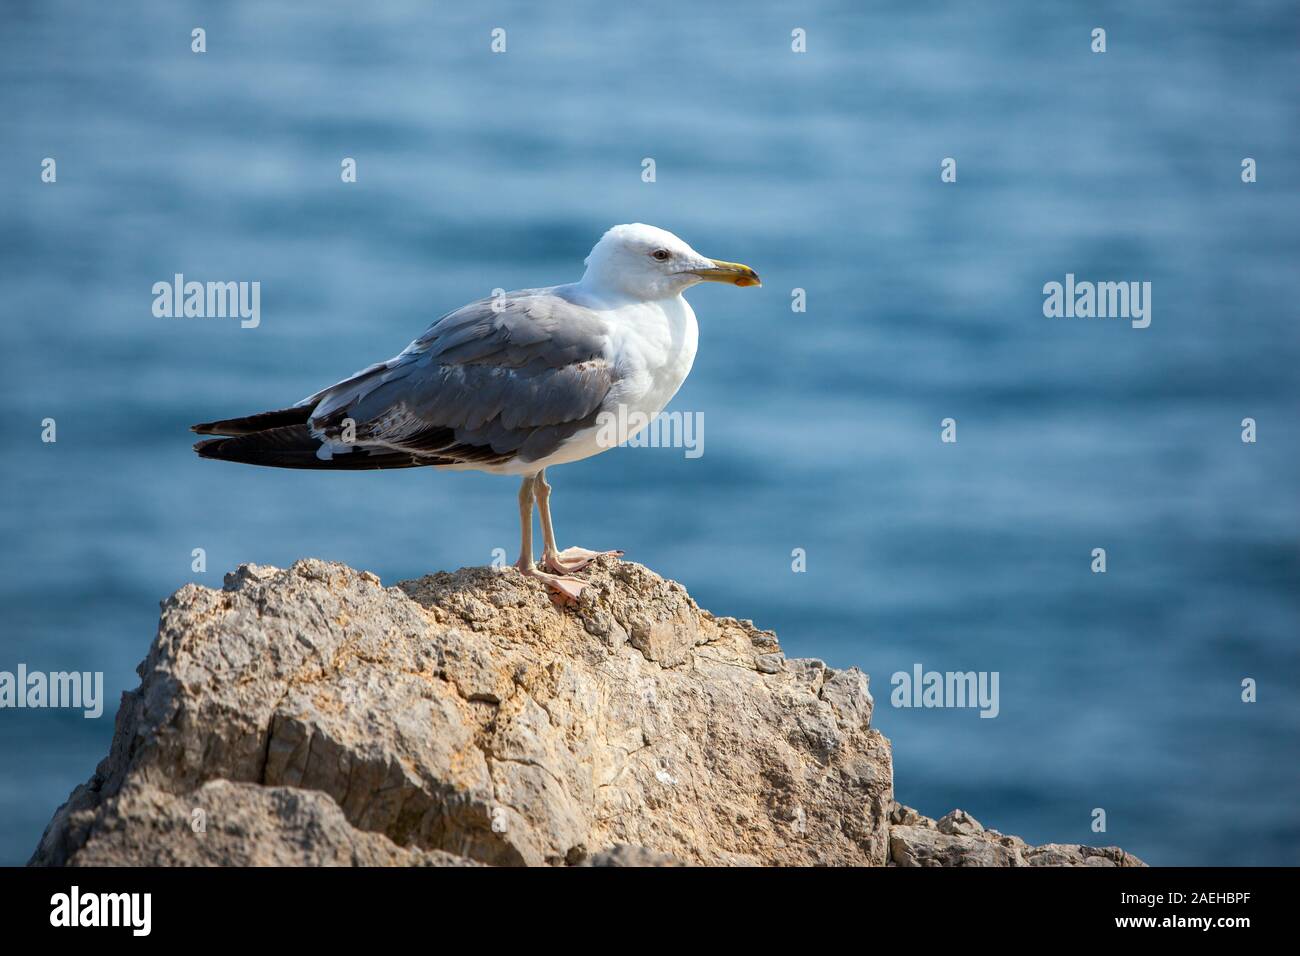 Close up view of Seagull portrait against sea shore. A white bird sitting on a rock by the beach. natural blue water background. Stock Photo